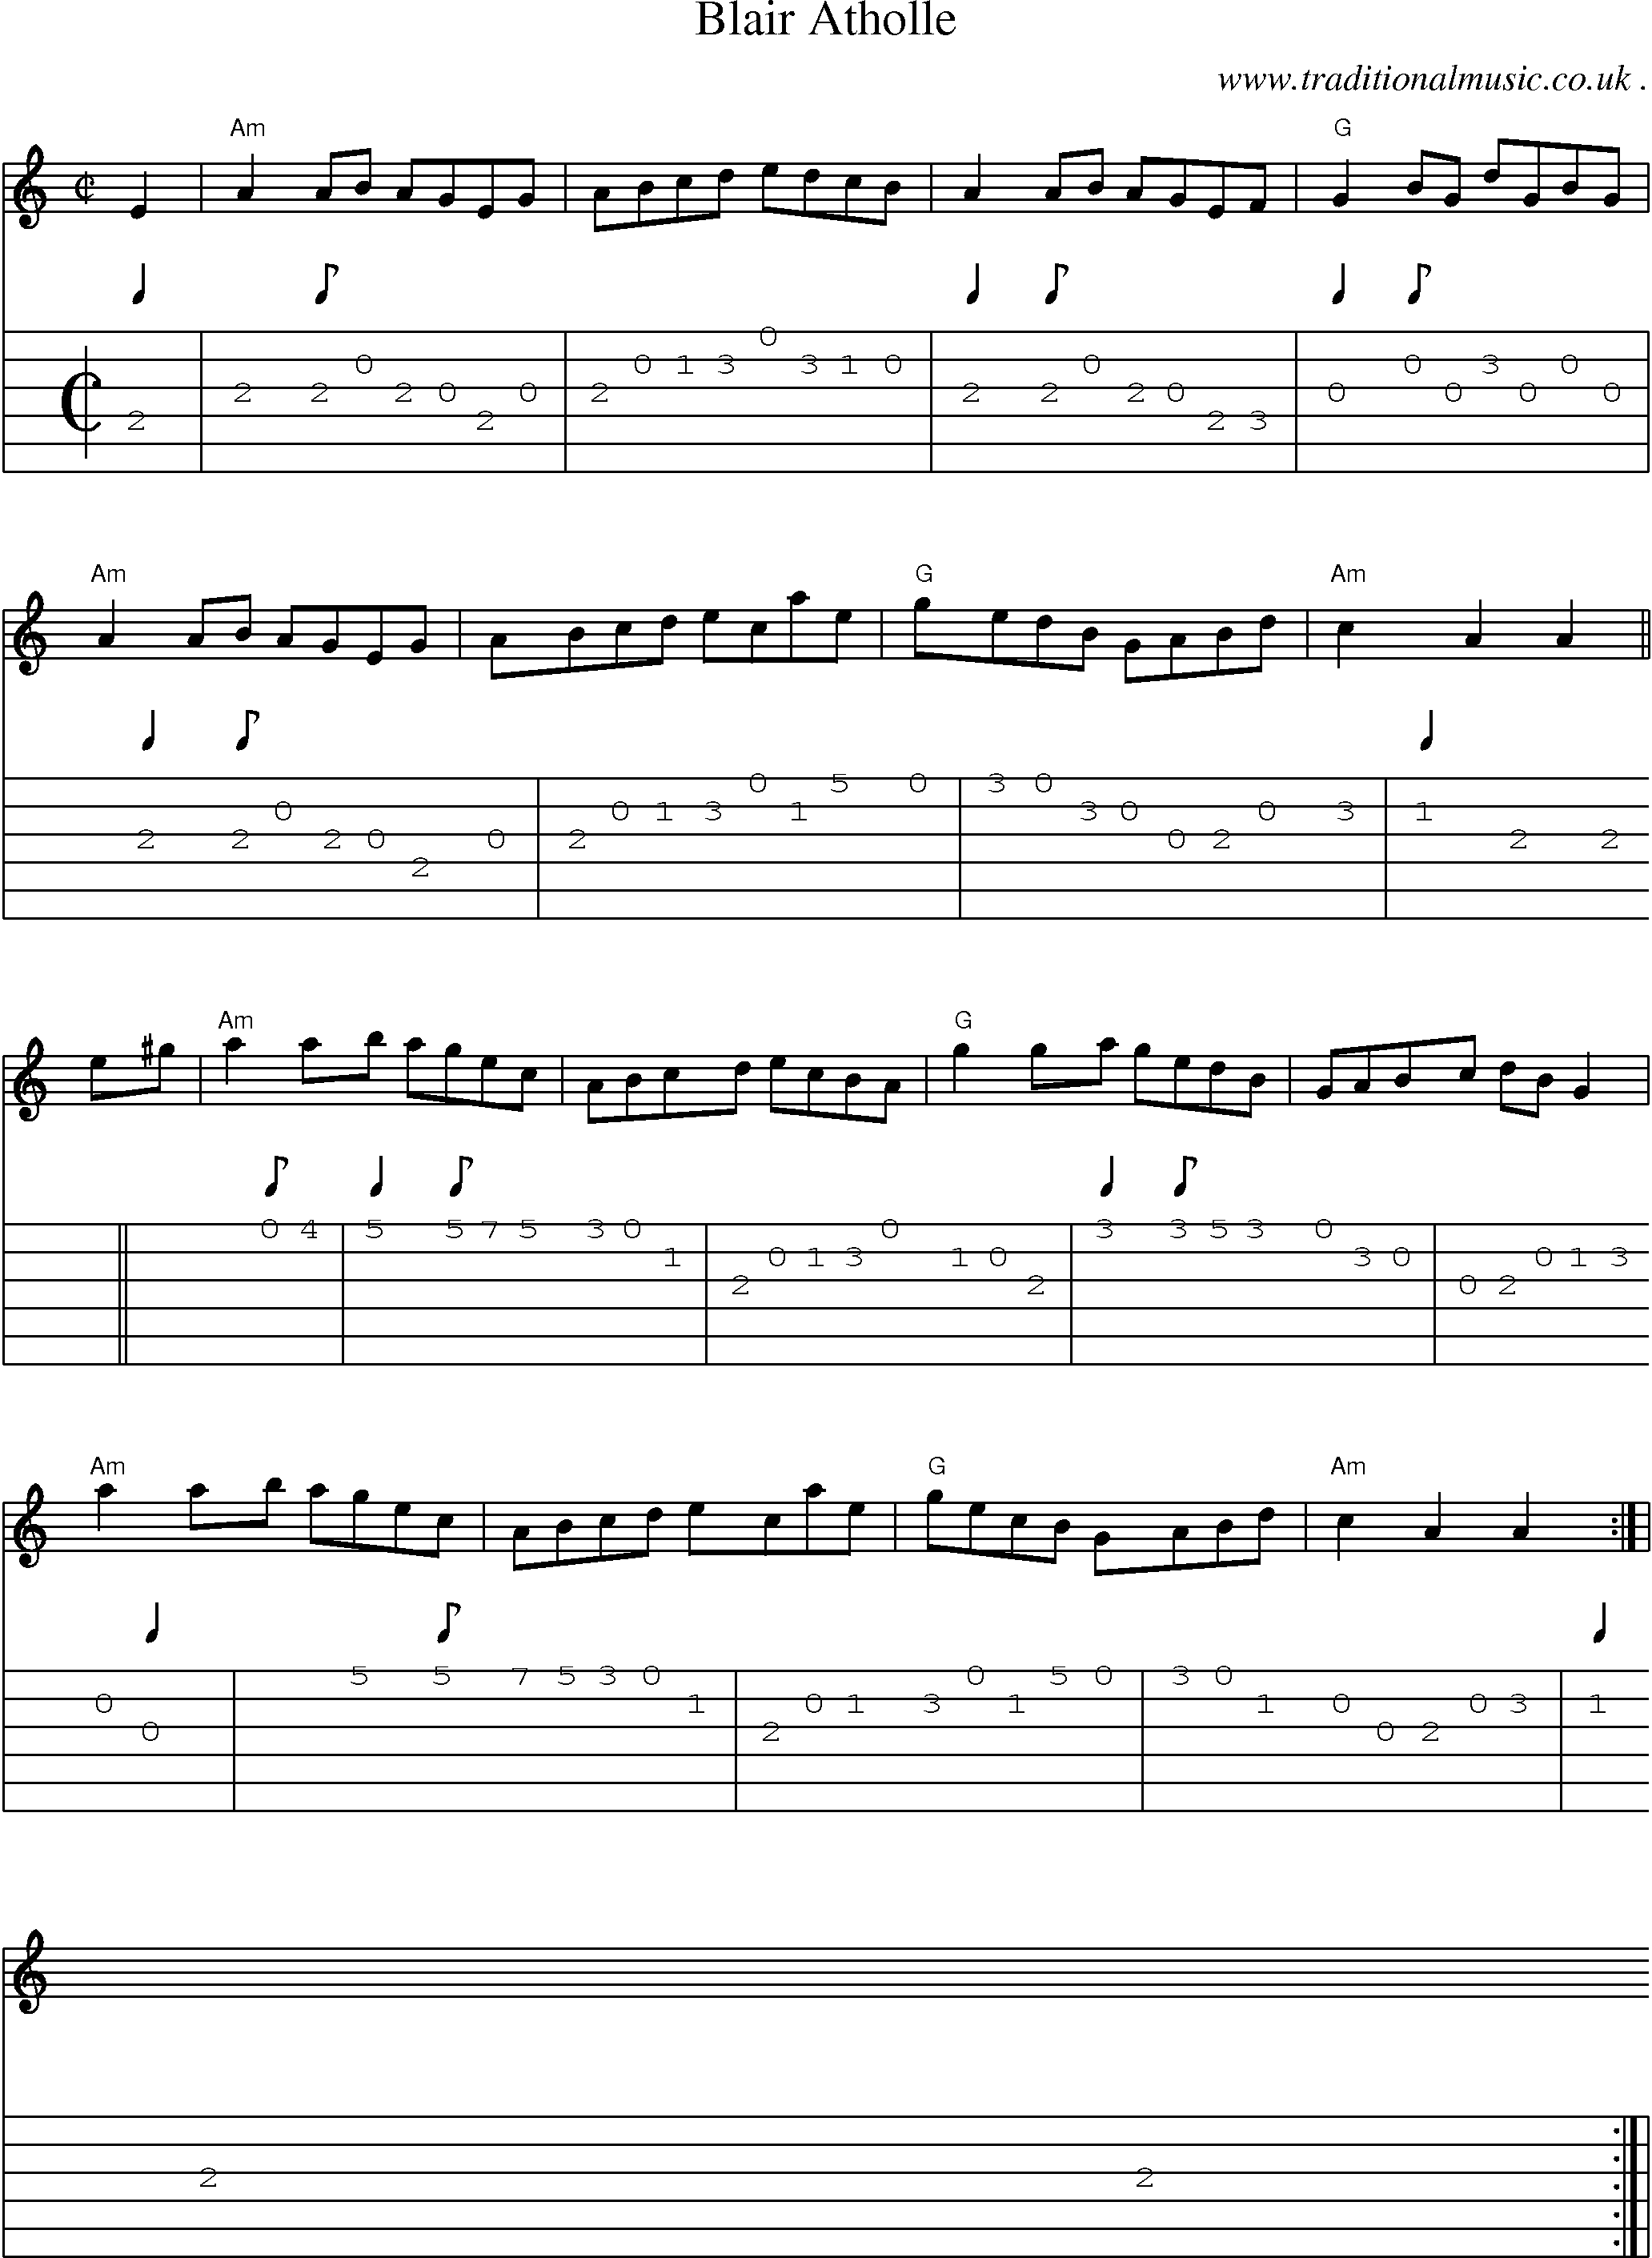 Sheet-music  score, Chords and Guitar Tabs for Blair Atholle